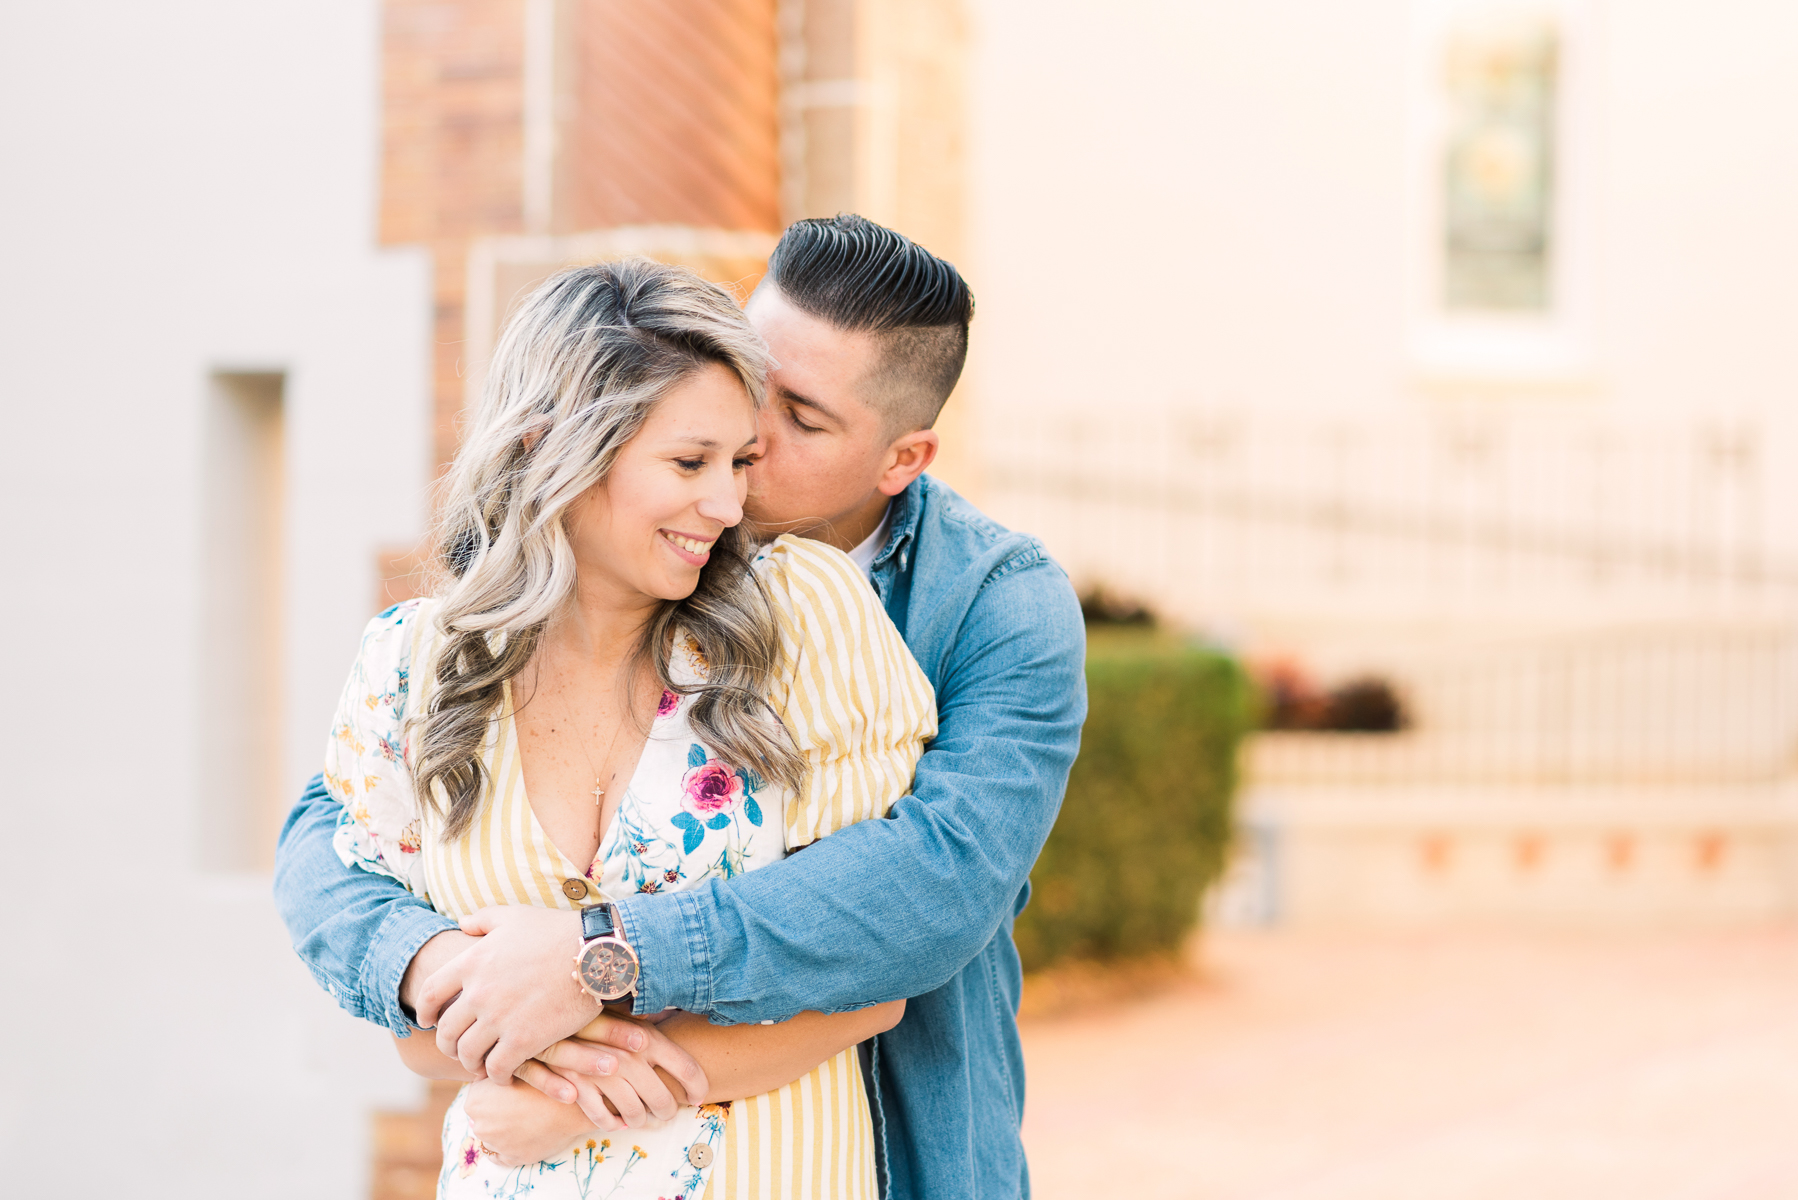 St. Augustine Engagement Photography